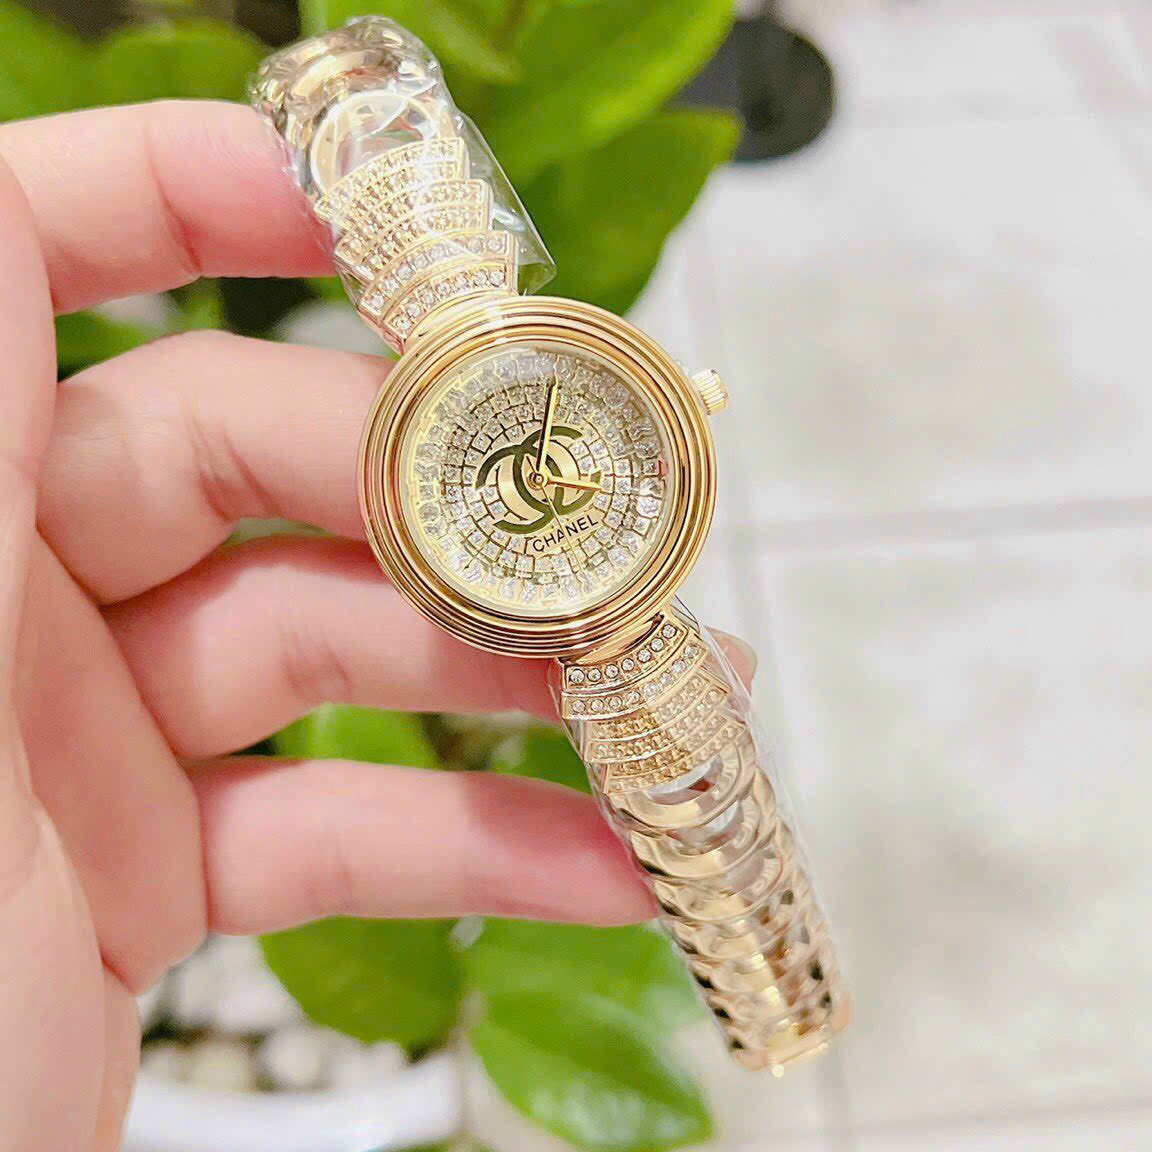 Đồng Hồ Nữ Chanel Diamond 33mm Leather Strap Like Auth